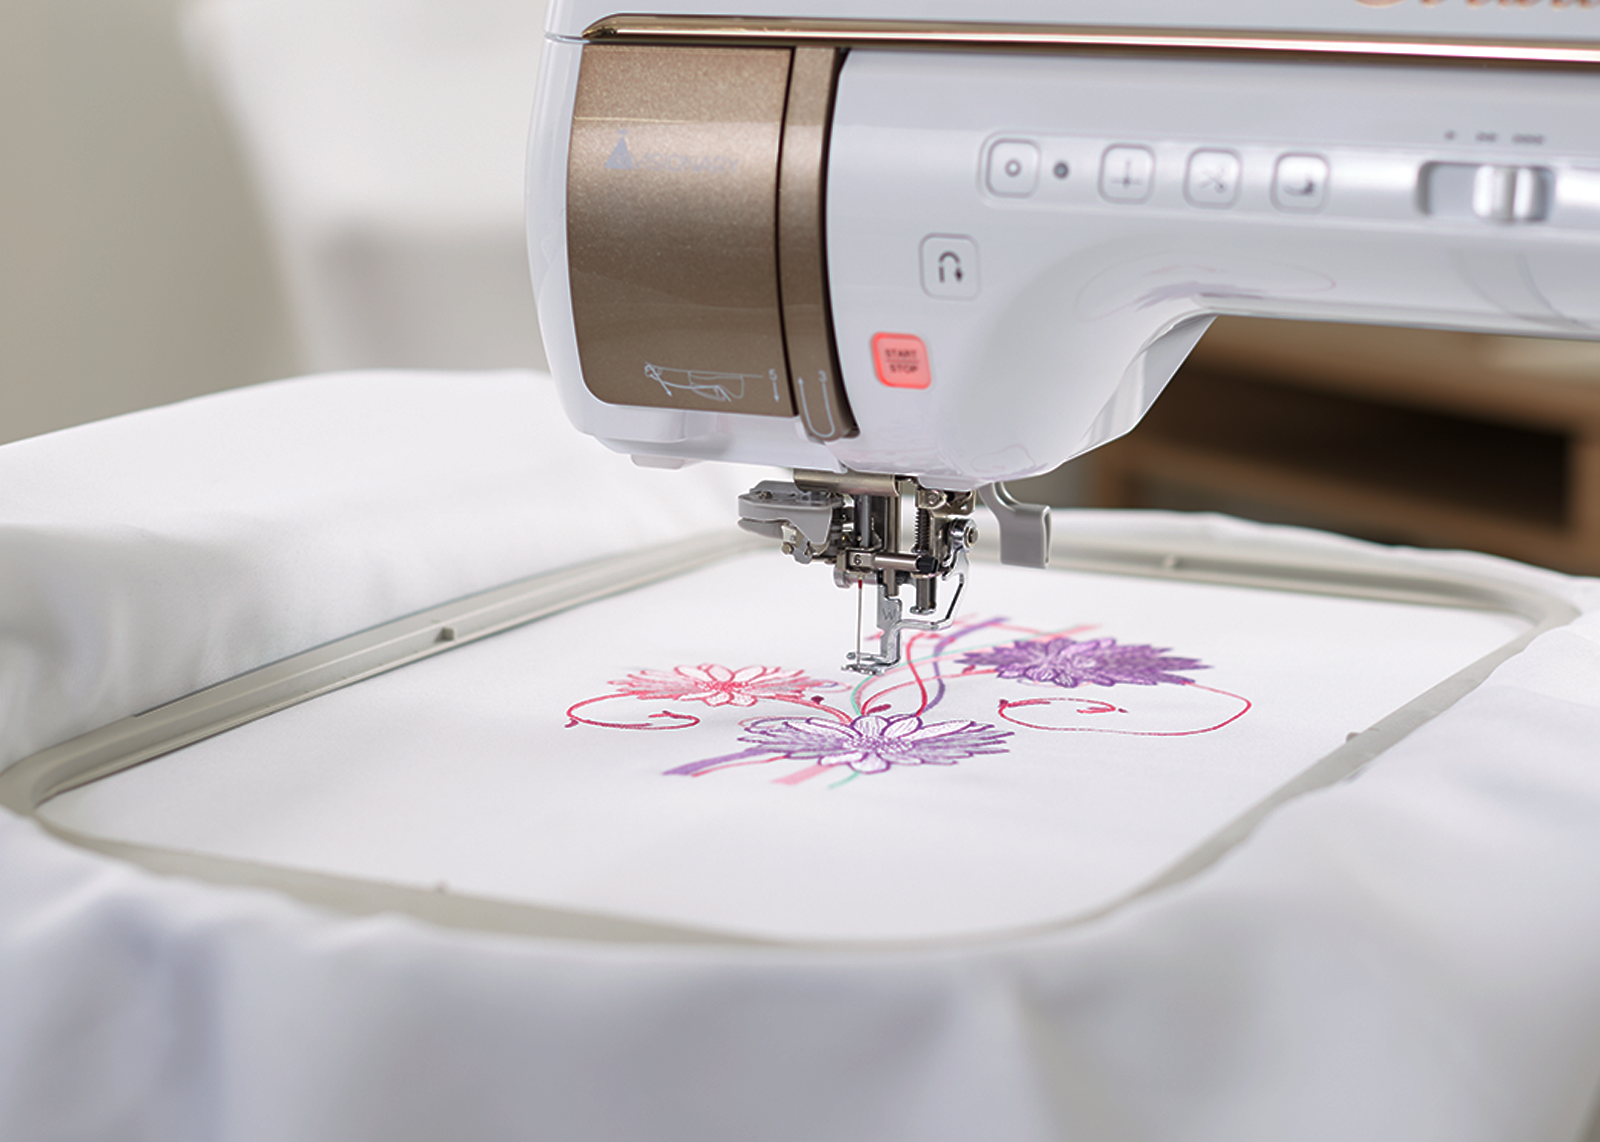 Create giant embroidery designs with the Baby Lock Solaris 2 Sewing and Embroidery Machine's huge embroidery hoop. 